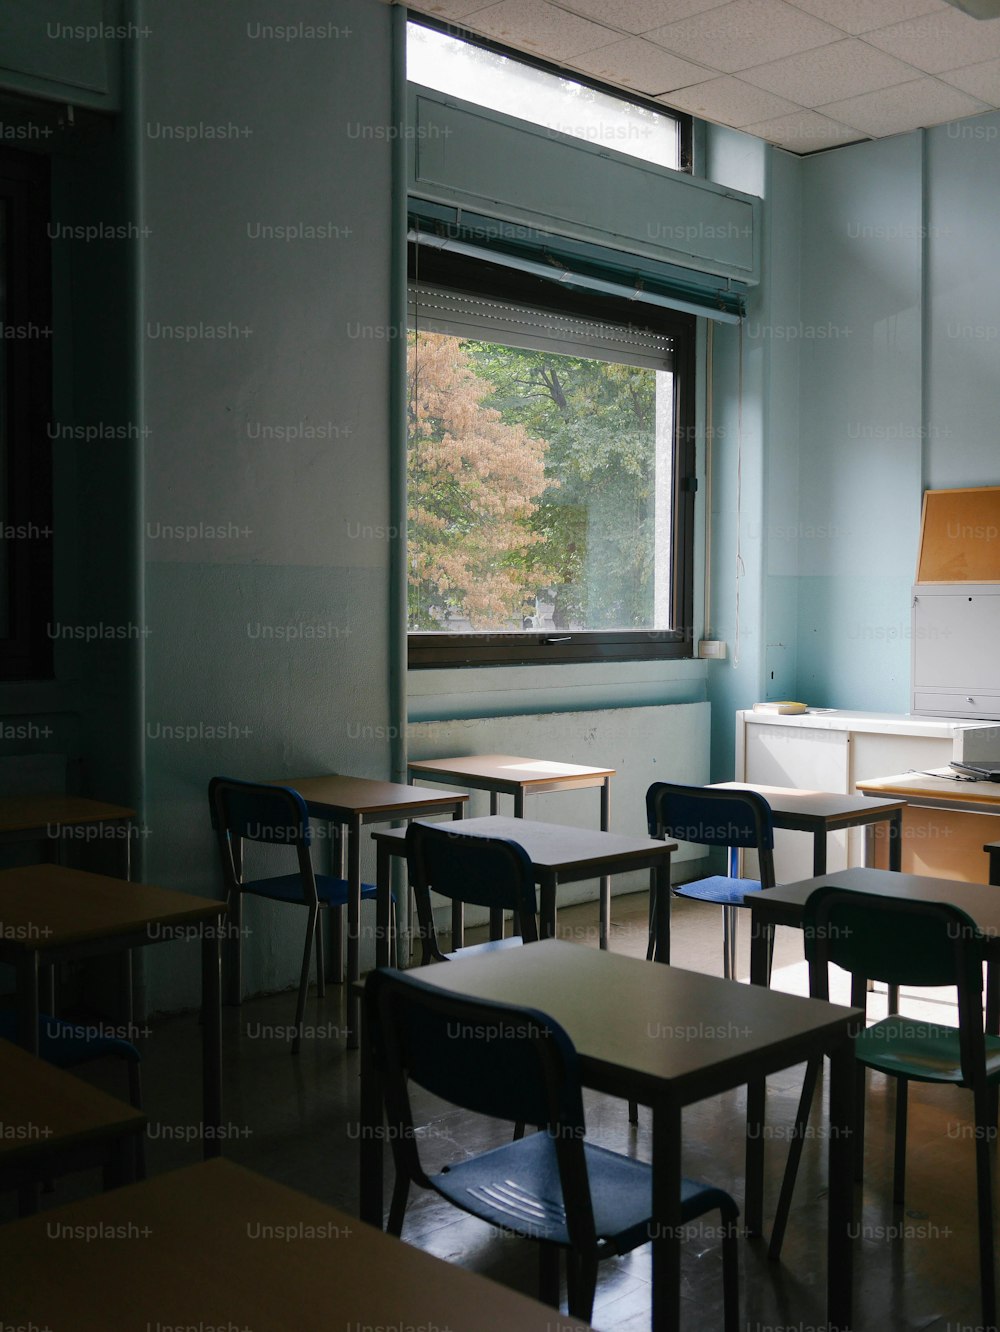 100+ Classroom Pictures  Download Free Images on Unsplash